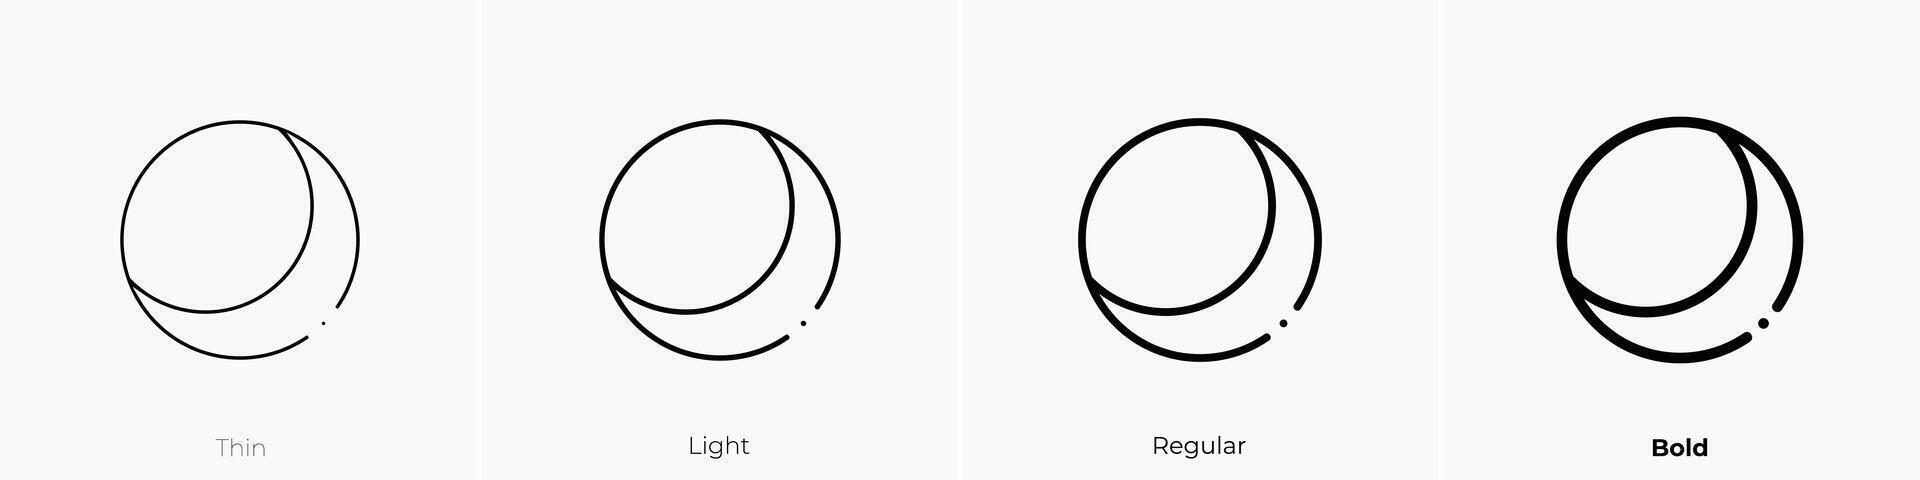 night mode icon. Thin, Light, Regular And Bold style design isolated on white background vector